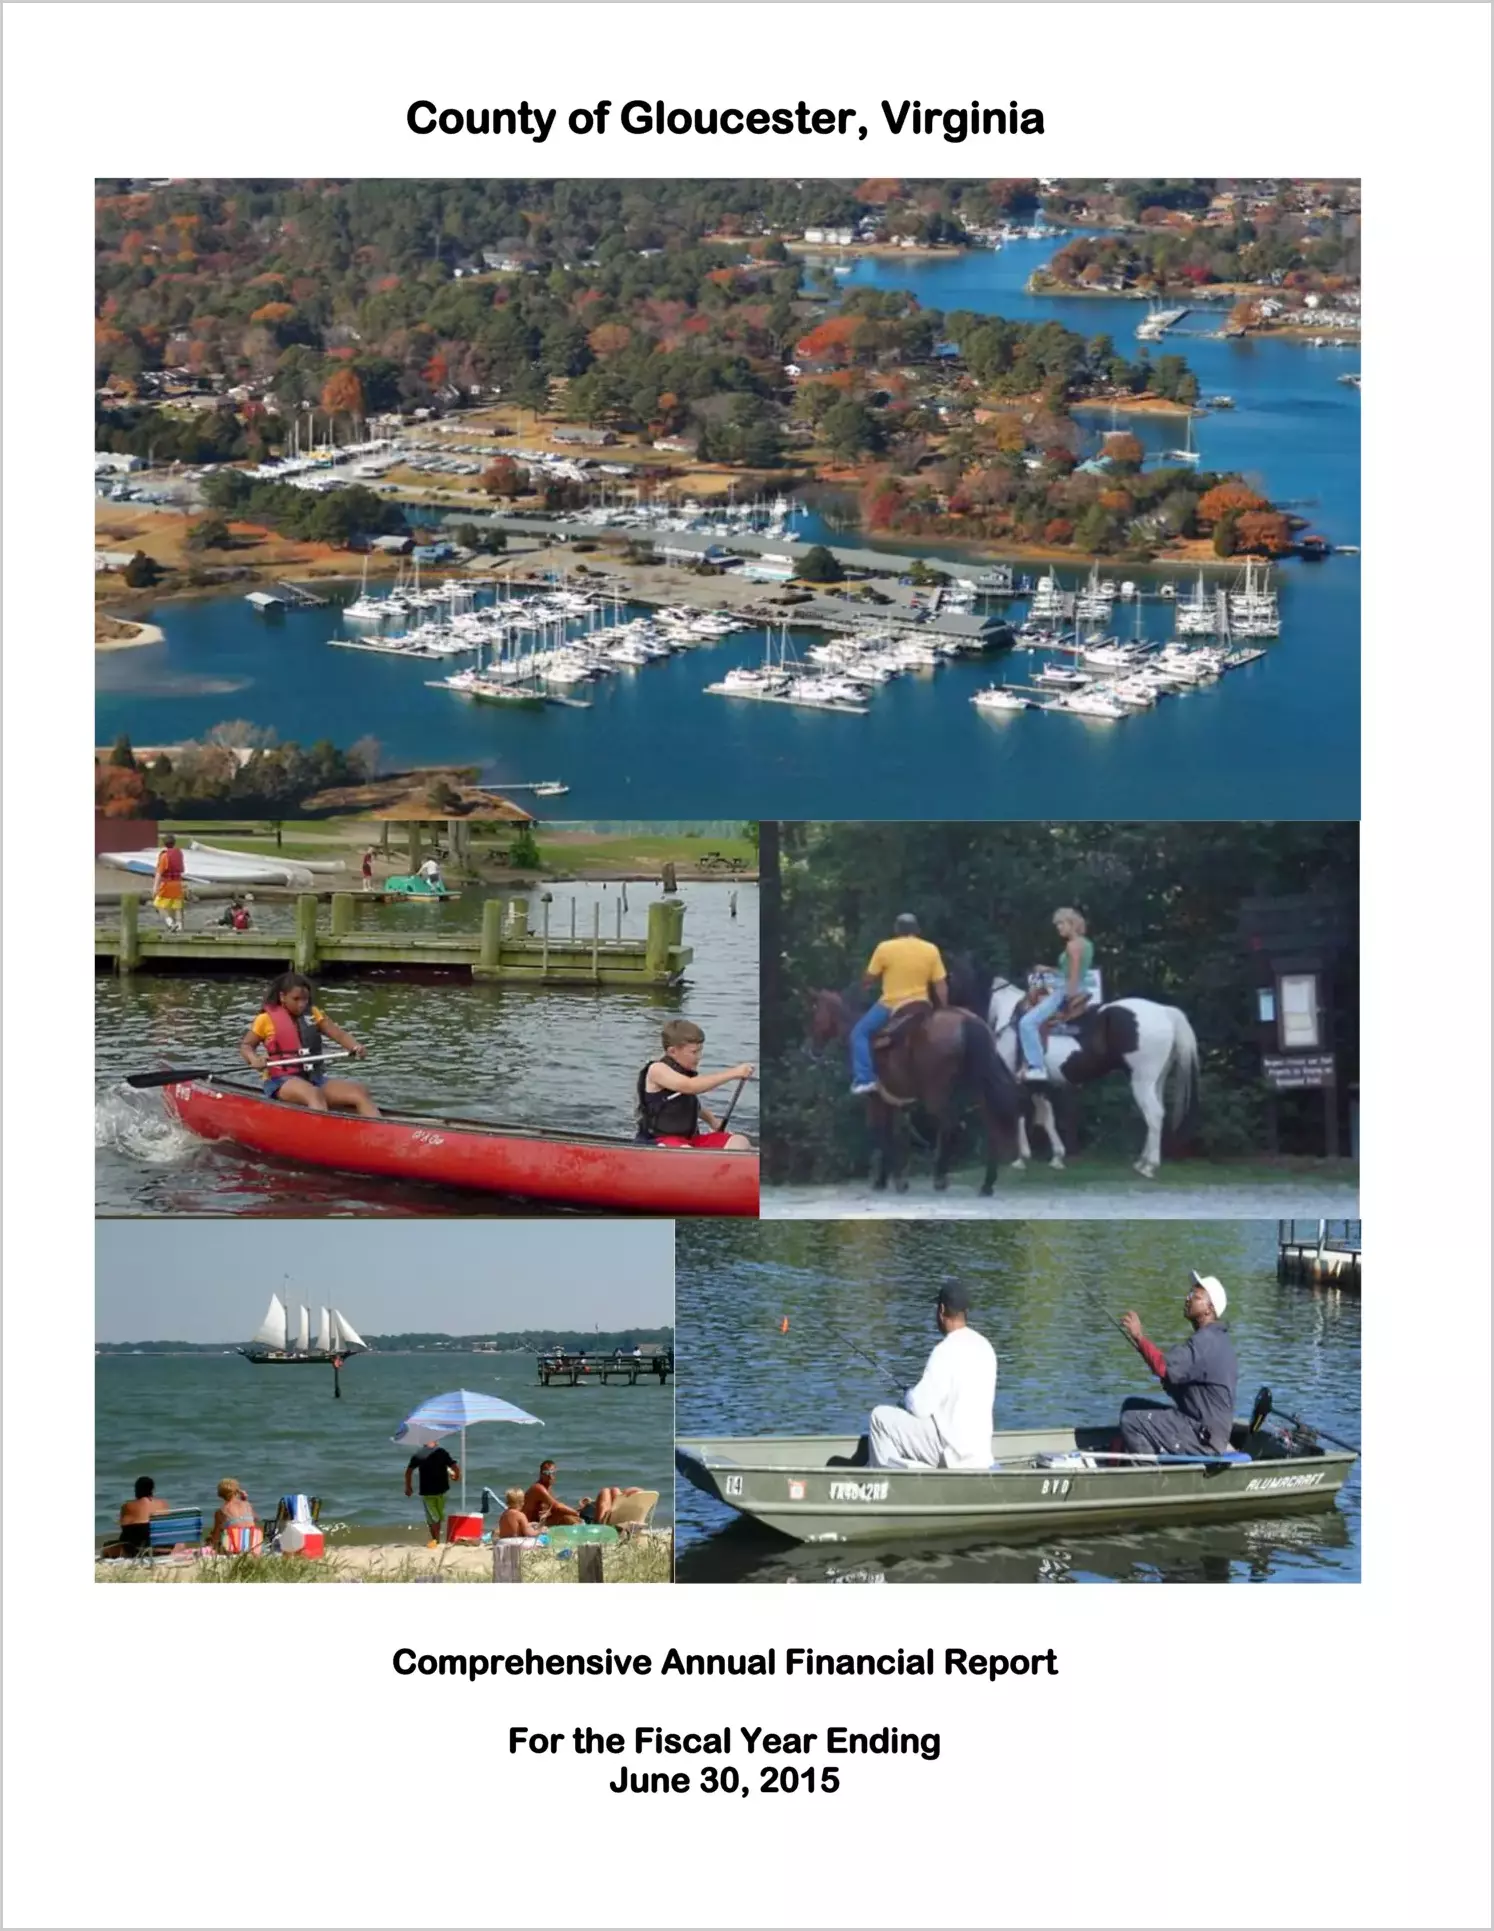 2015 Annual Financial Report for County of Gloucester